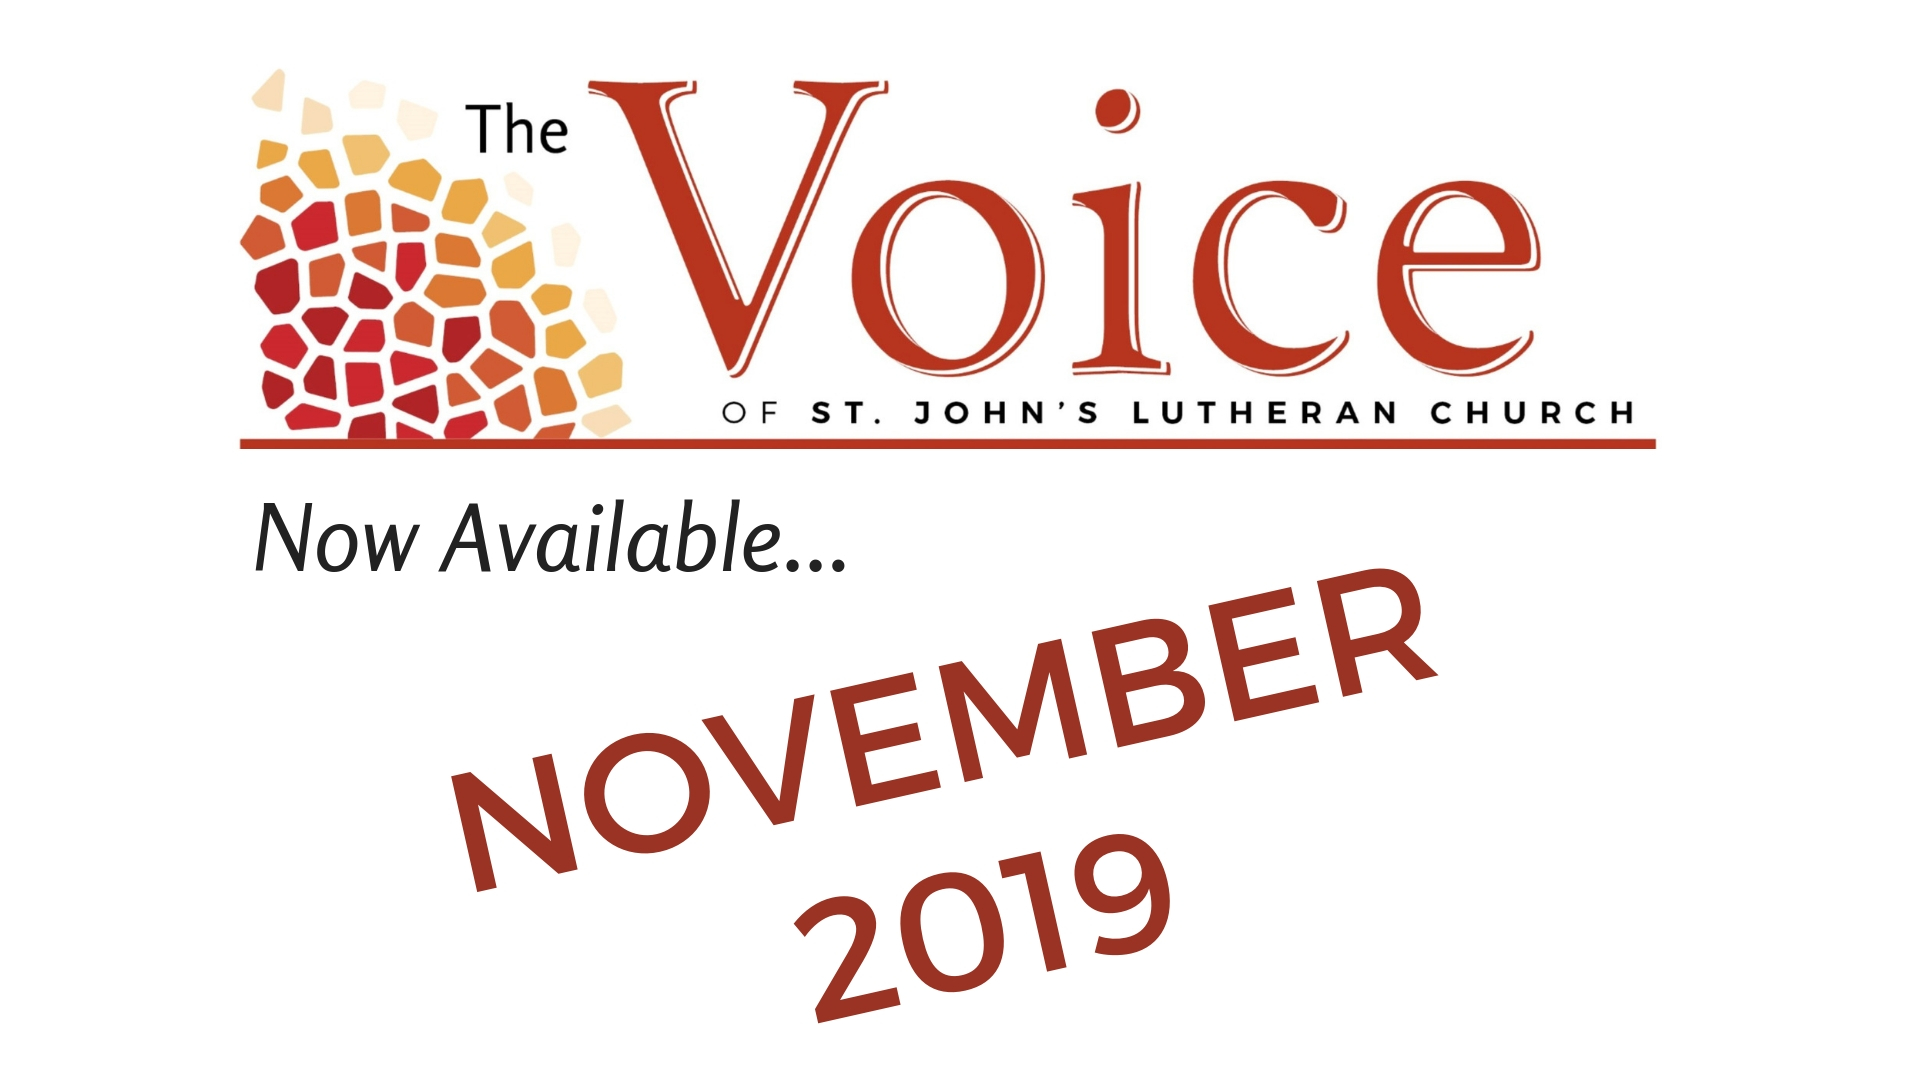 November Edition of the Voice is Now Available St. John’s Lutheran Church